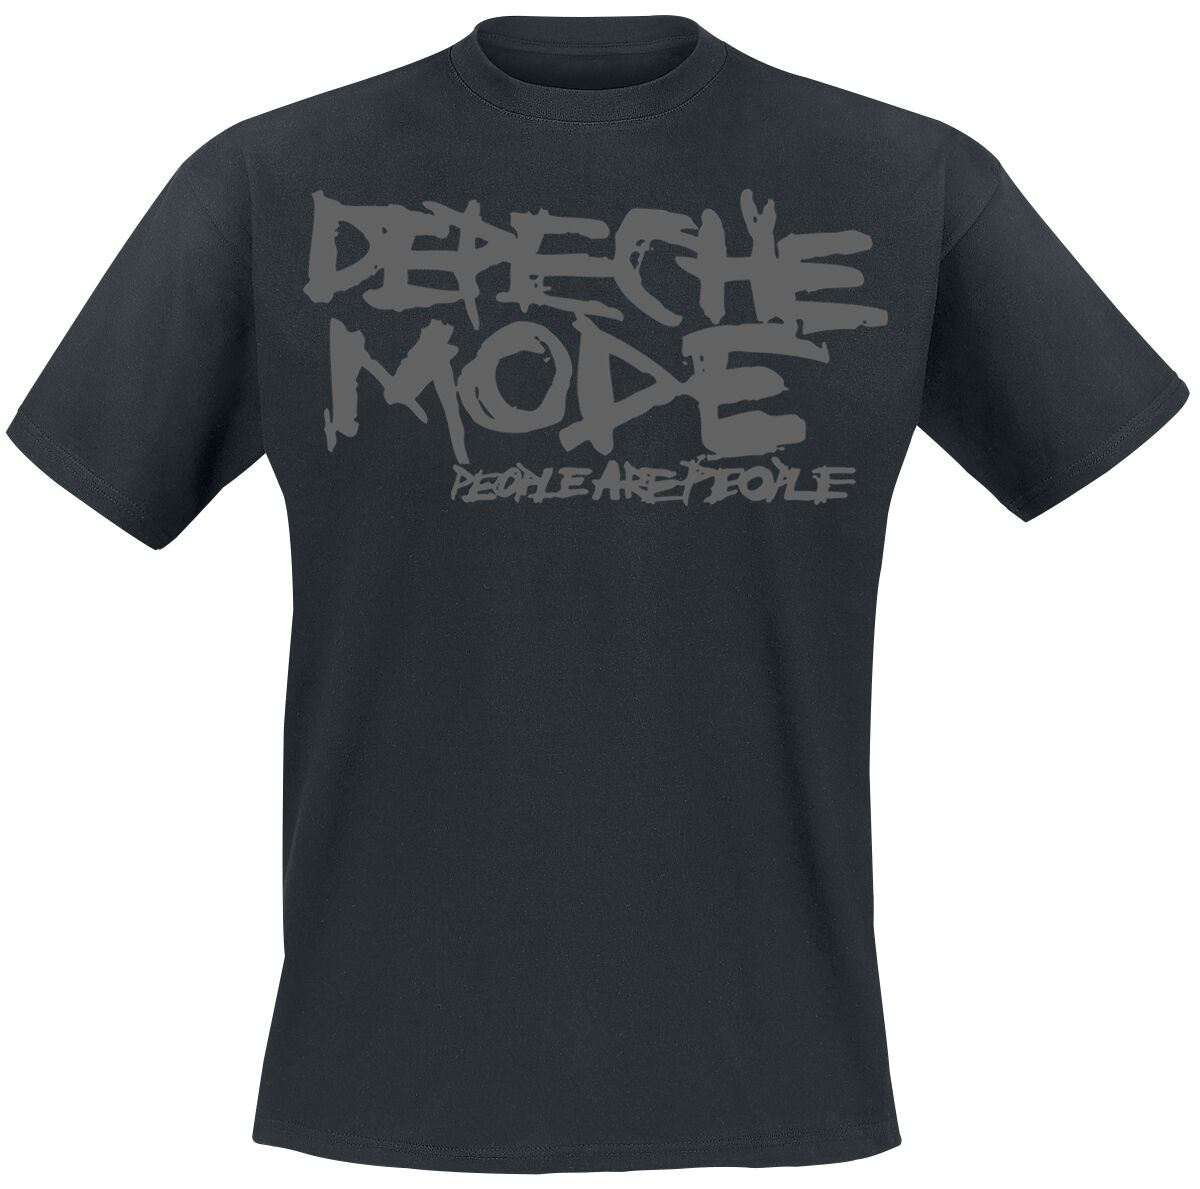 Image of Depeche Mode People Are People T-Shirt schwarz